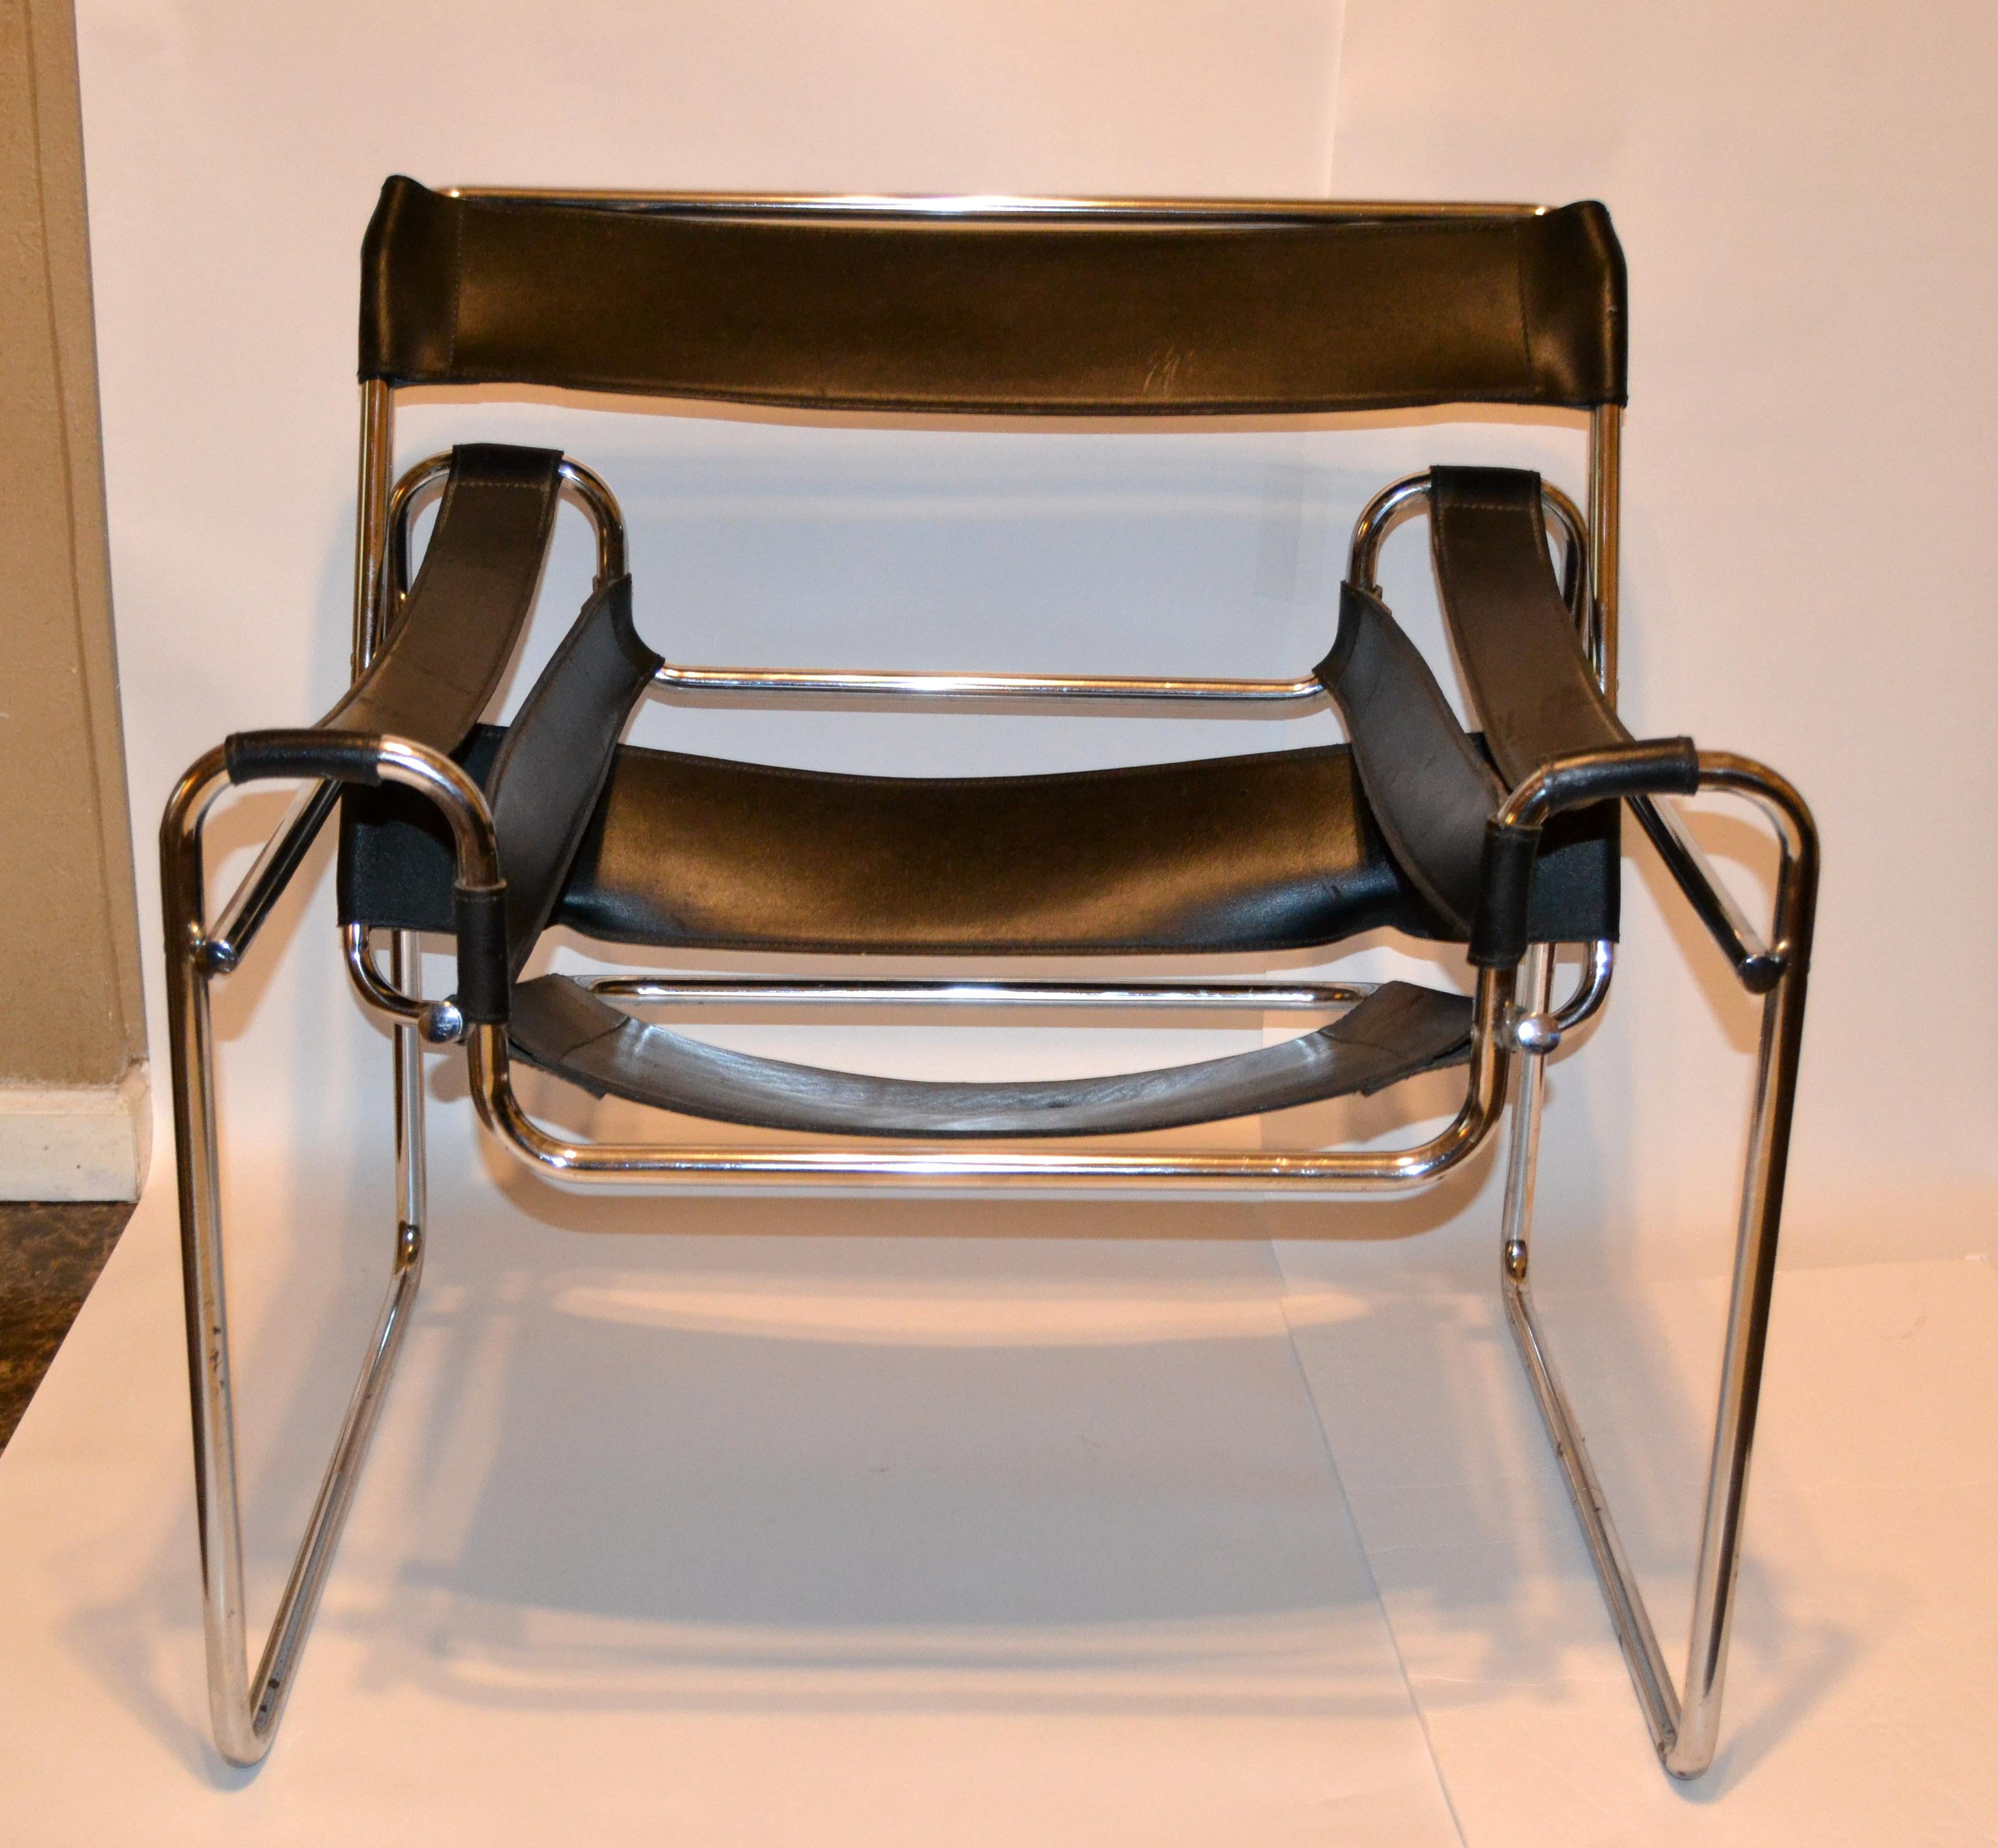 Italian black Leather Strap Lounge Chair in chromed steel styled after the famous Marcel Breuer for Gavina sculptural tubular frame Wassily Chair.
This Mid-Century Modern Accent Chair is made in circa 1970 in Italy.
Unmarked.
In fair vintage